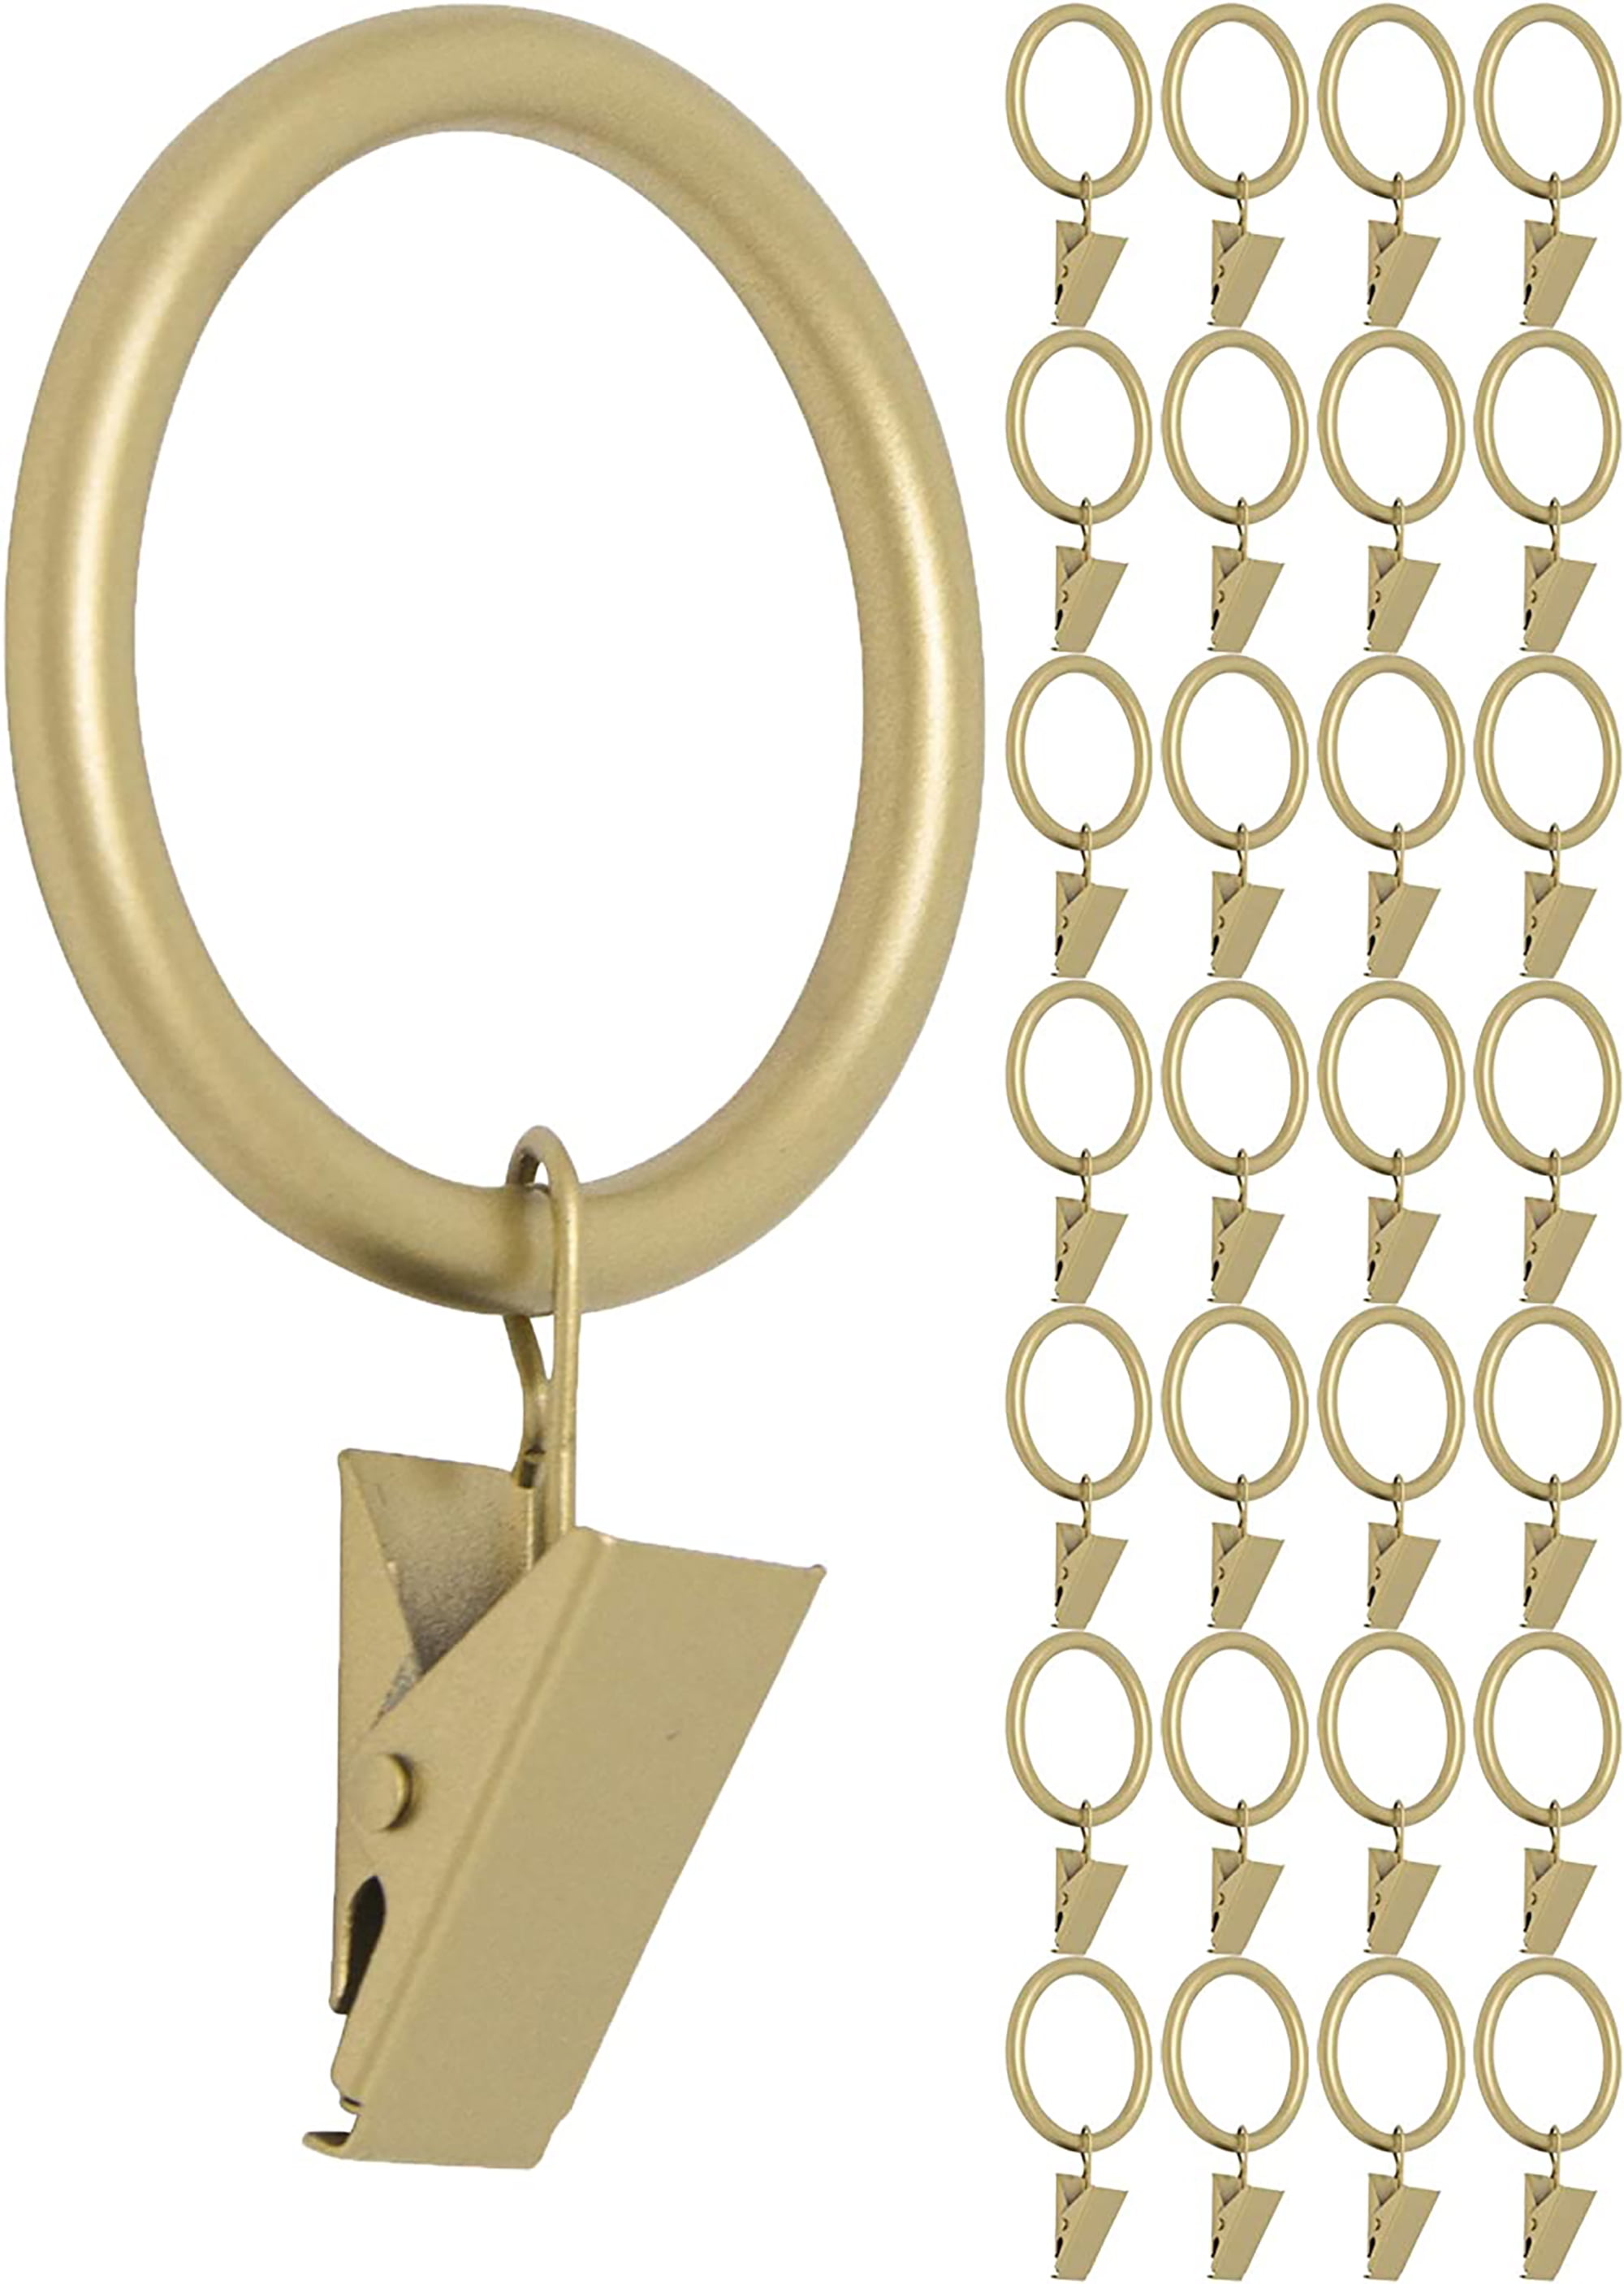 SYRLIG Curtain ring with clip and hook, brass color, 11/2 - IKEA